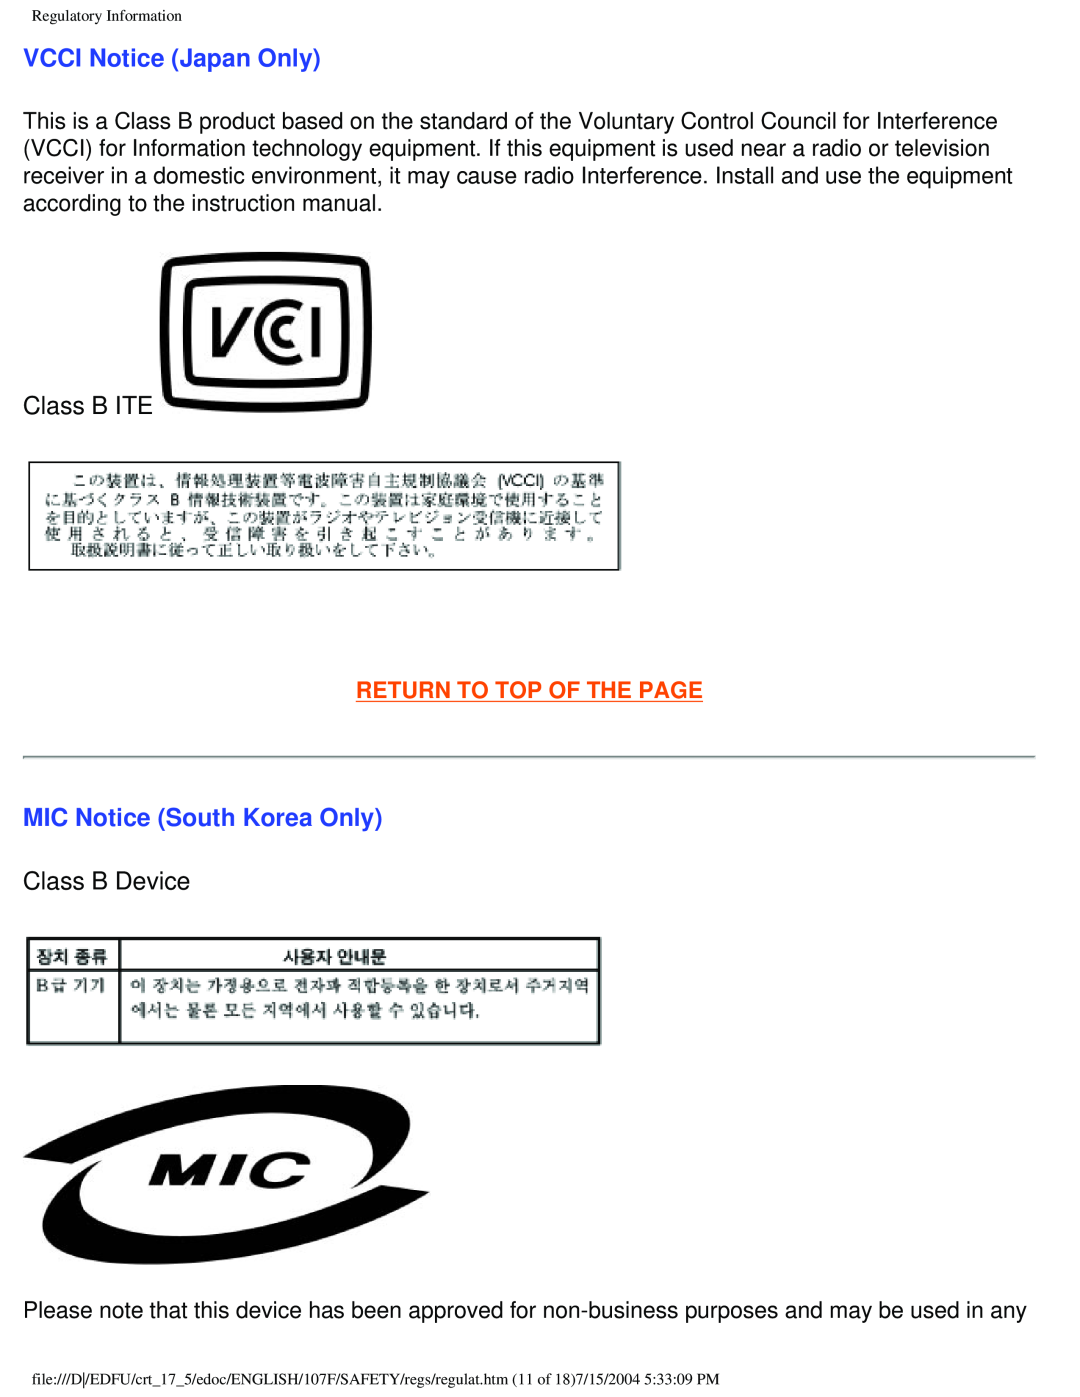 Philips 107E5 VCCI Notice Japan Only, MIC Notice South Korea Only, Class B ITE, Class B Device, Return To Top Of The Page 